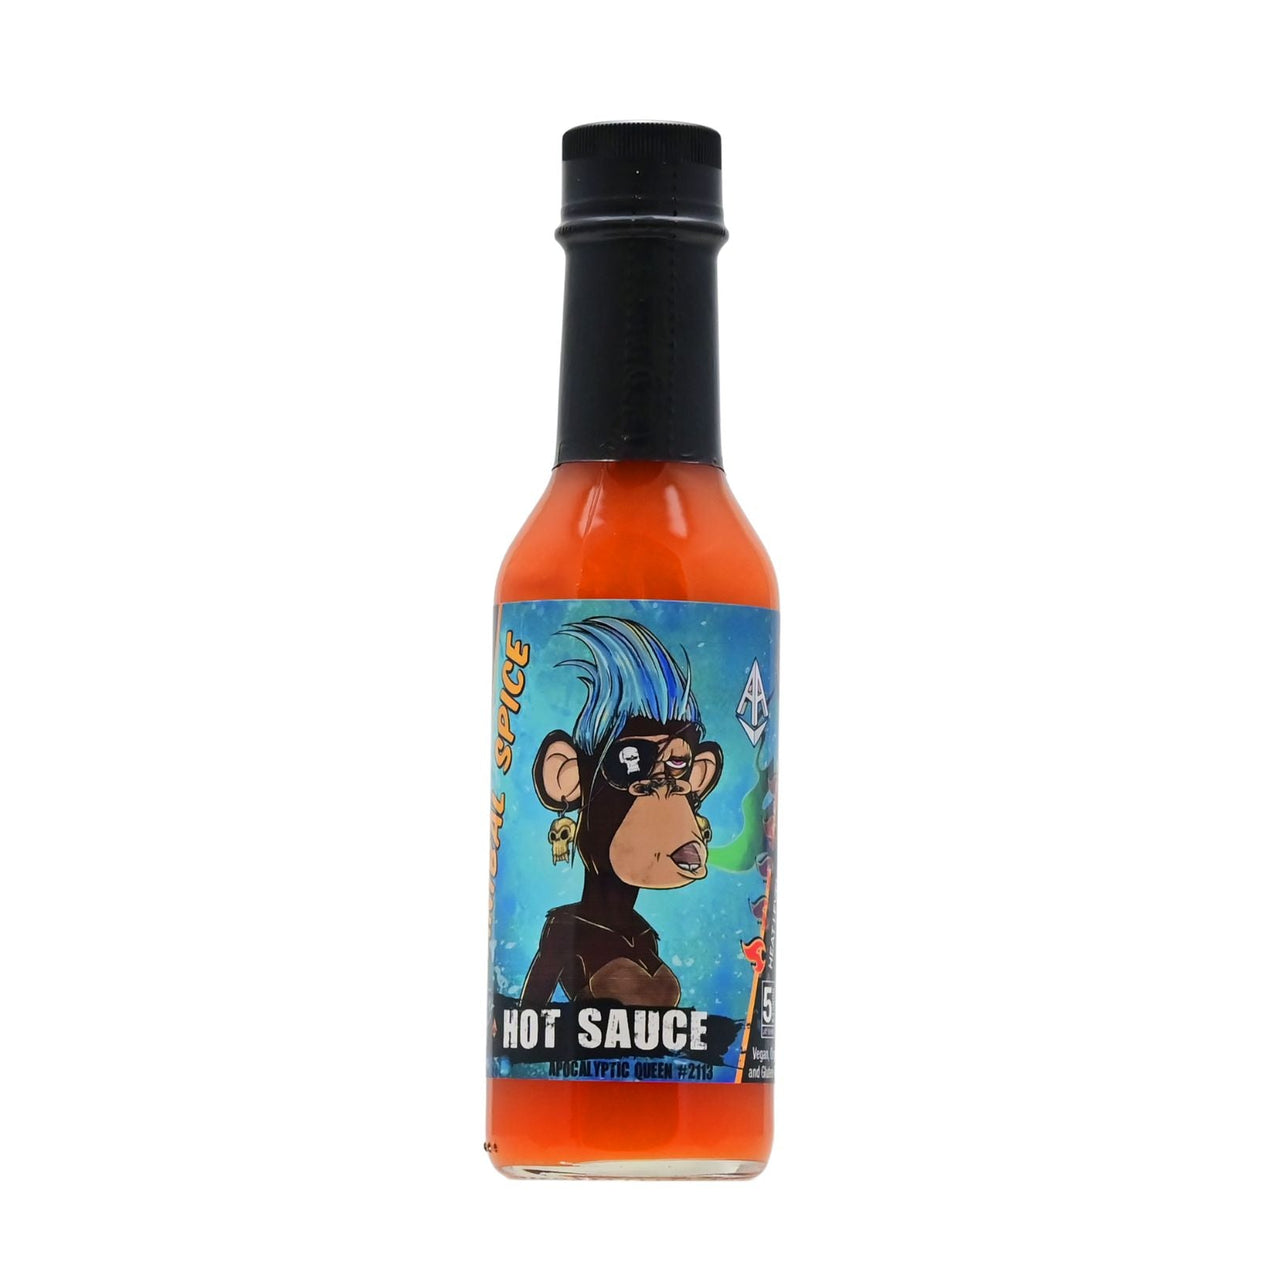 Apocalyptic Queen #2113 Cannibal Spice Hot Sauce